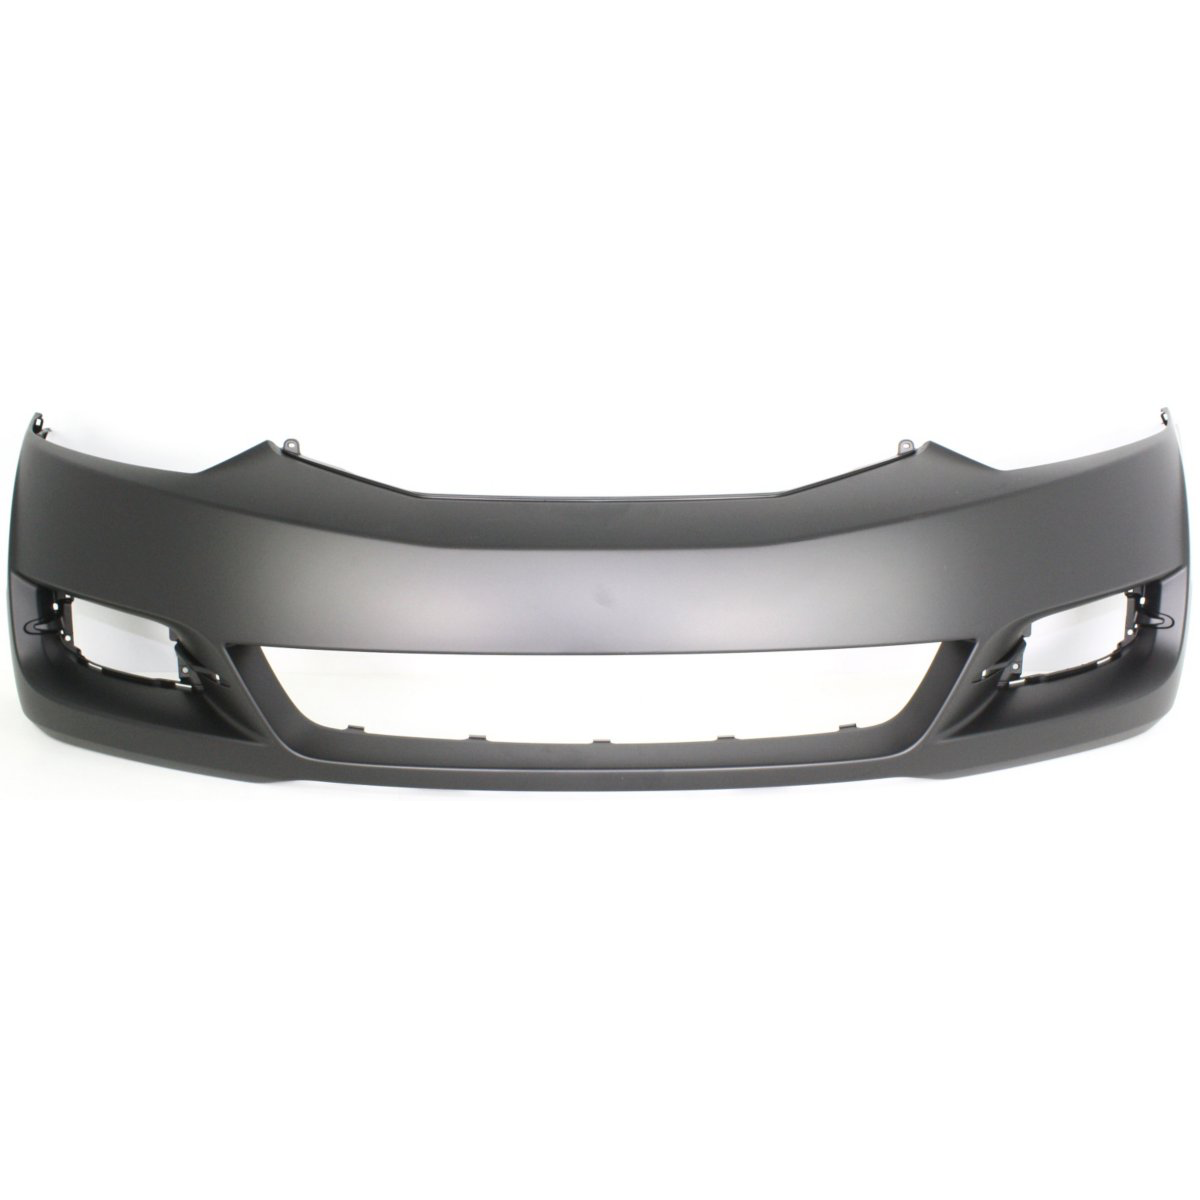 2009-2011 HONDA CIVIC Coupe 2 door Front Bumper Cover Coupe Painted to Match